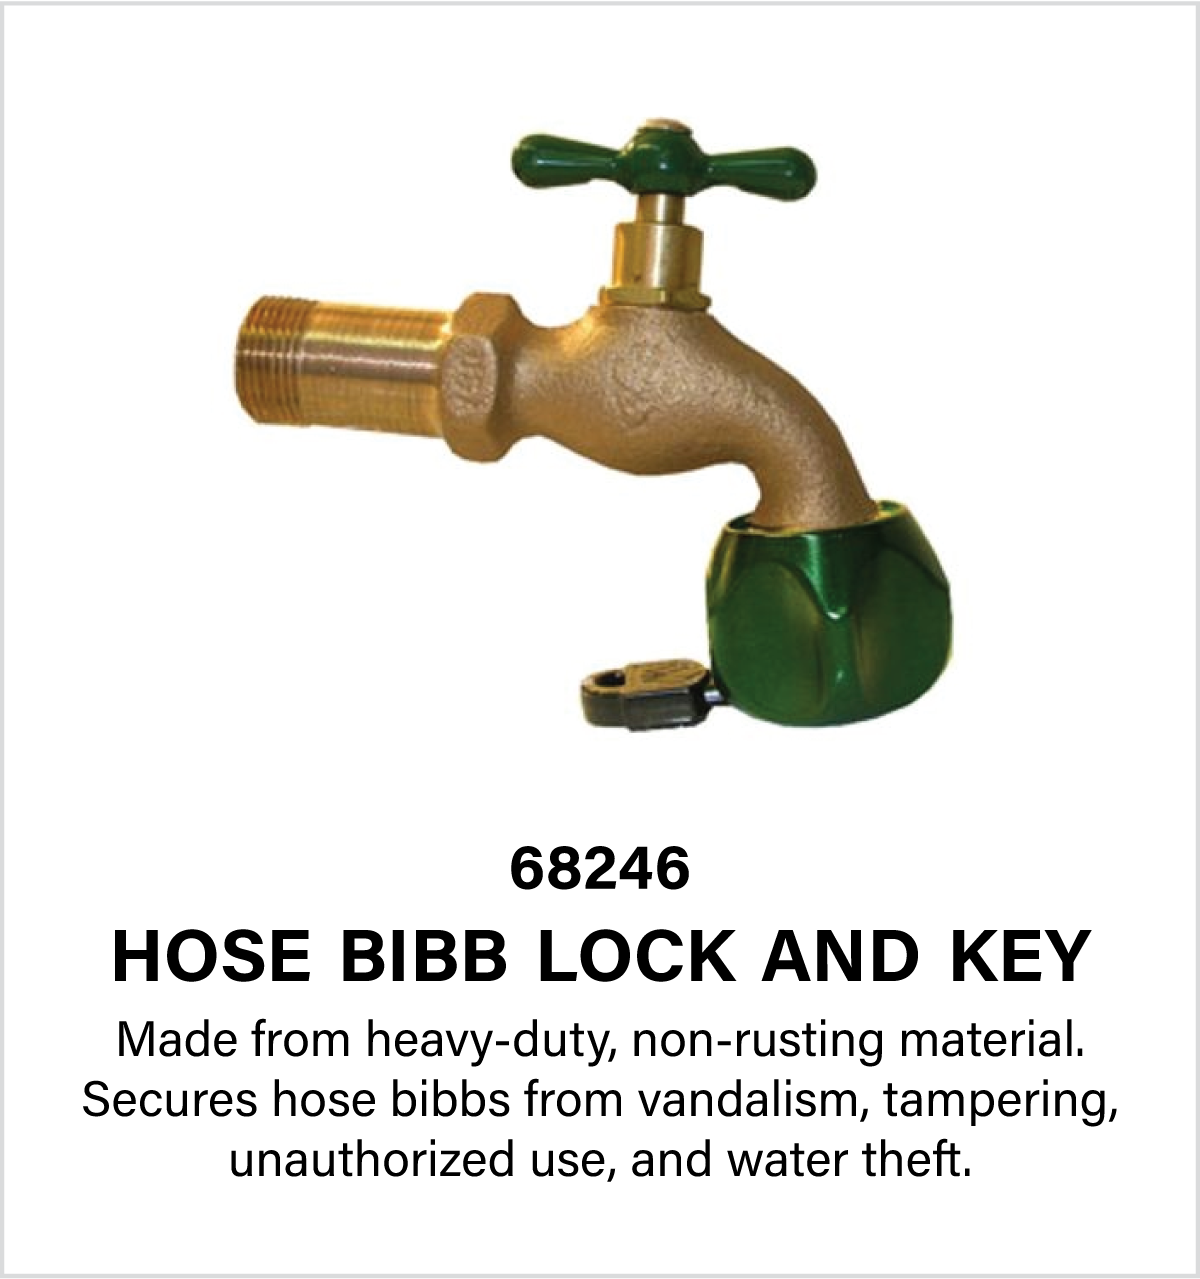 Winter Safety_Hose Lock and Key